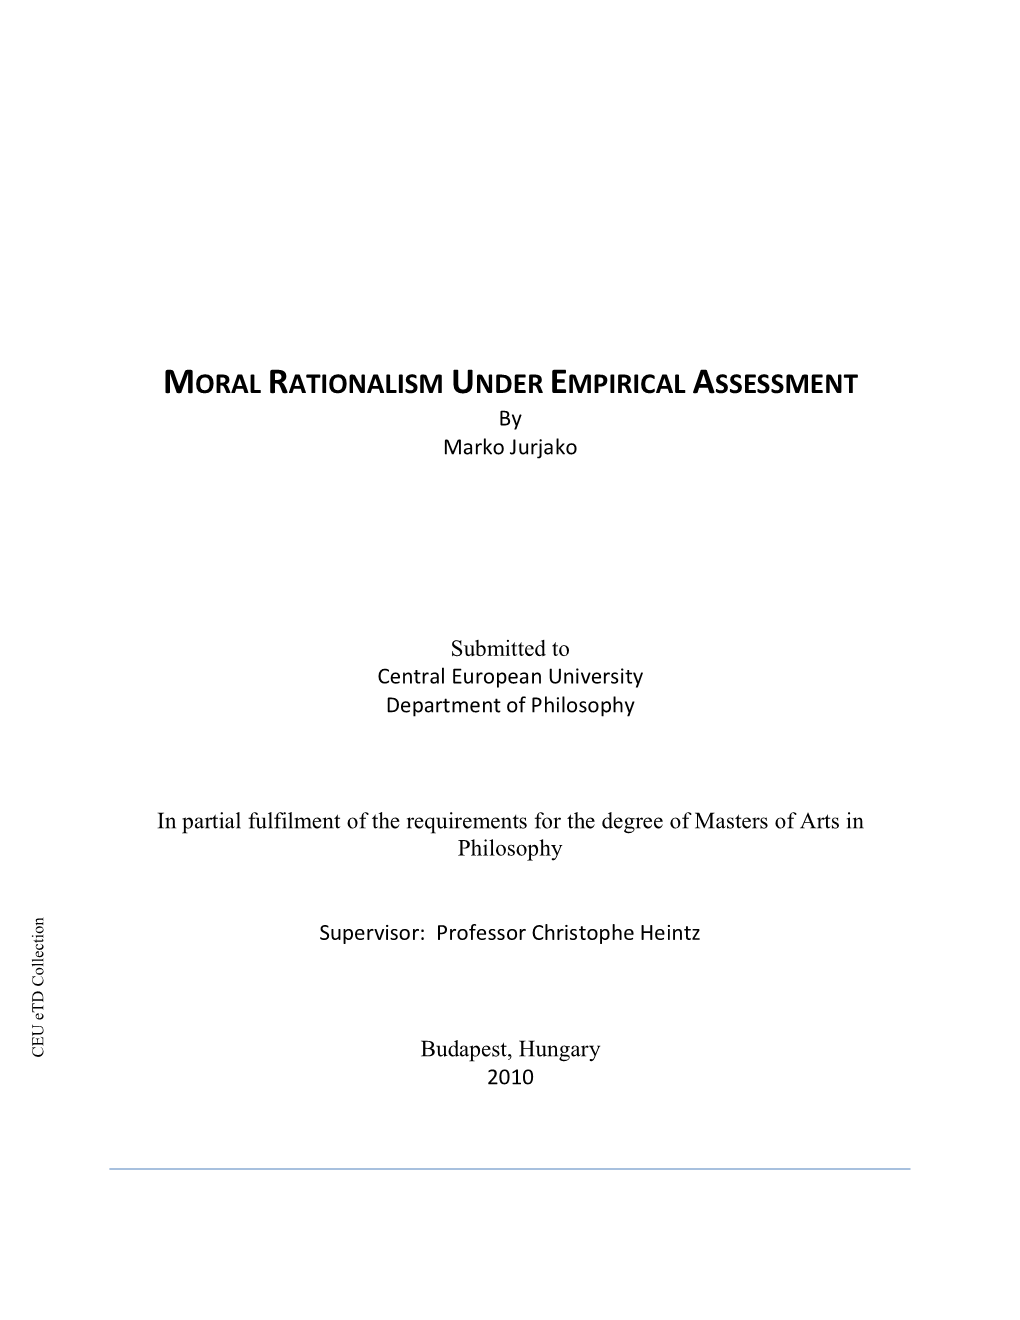 Marko Jurjako Marko Submitted to Submitted U Philosophy NDER 2010 by E MPIRICAL a SSESSMENT CEU Etd Collection Most of the Tenets of Moral of of the Rationalism